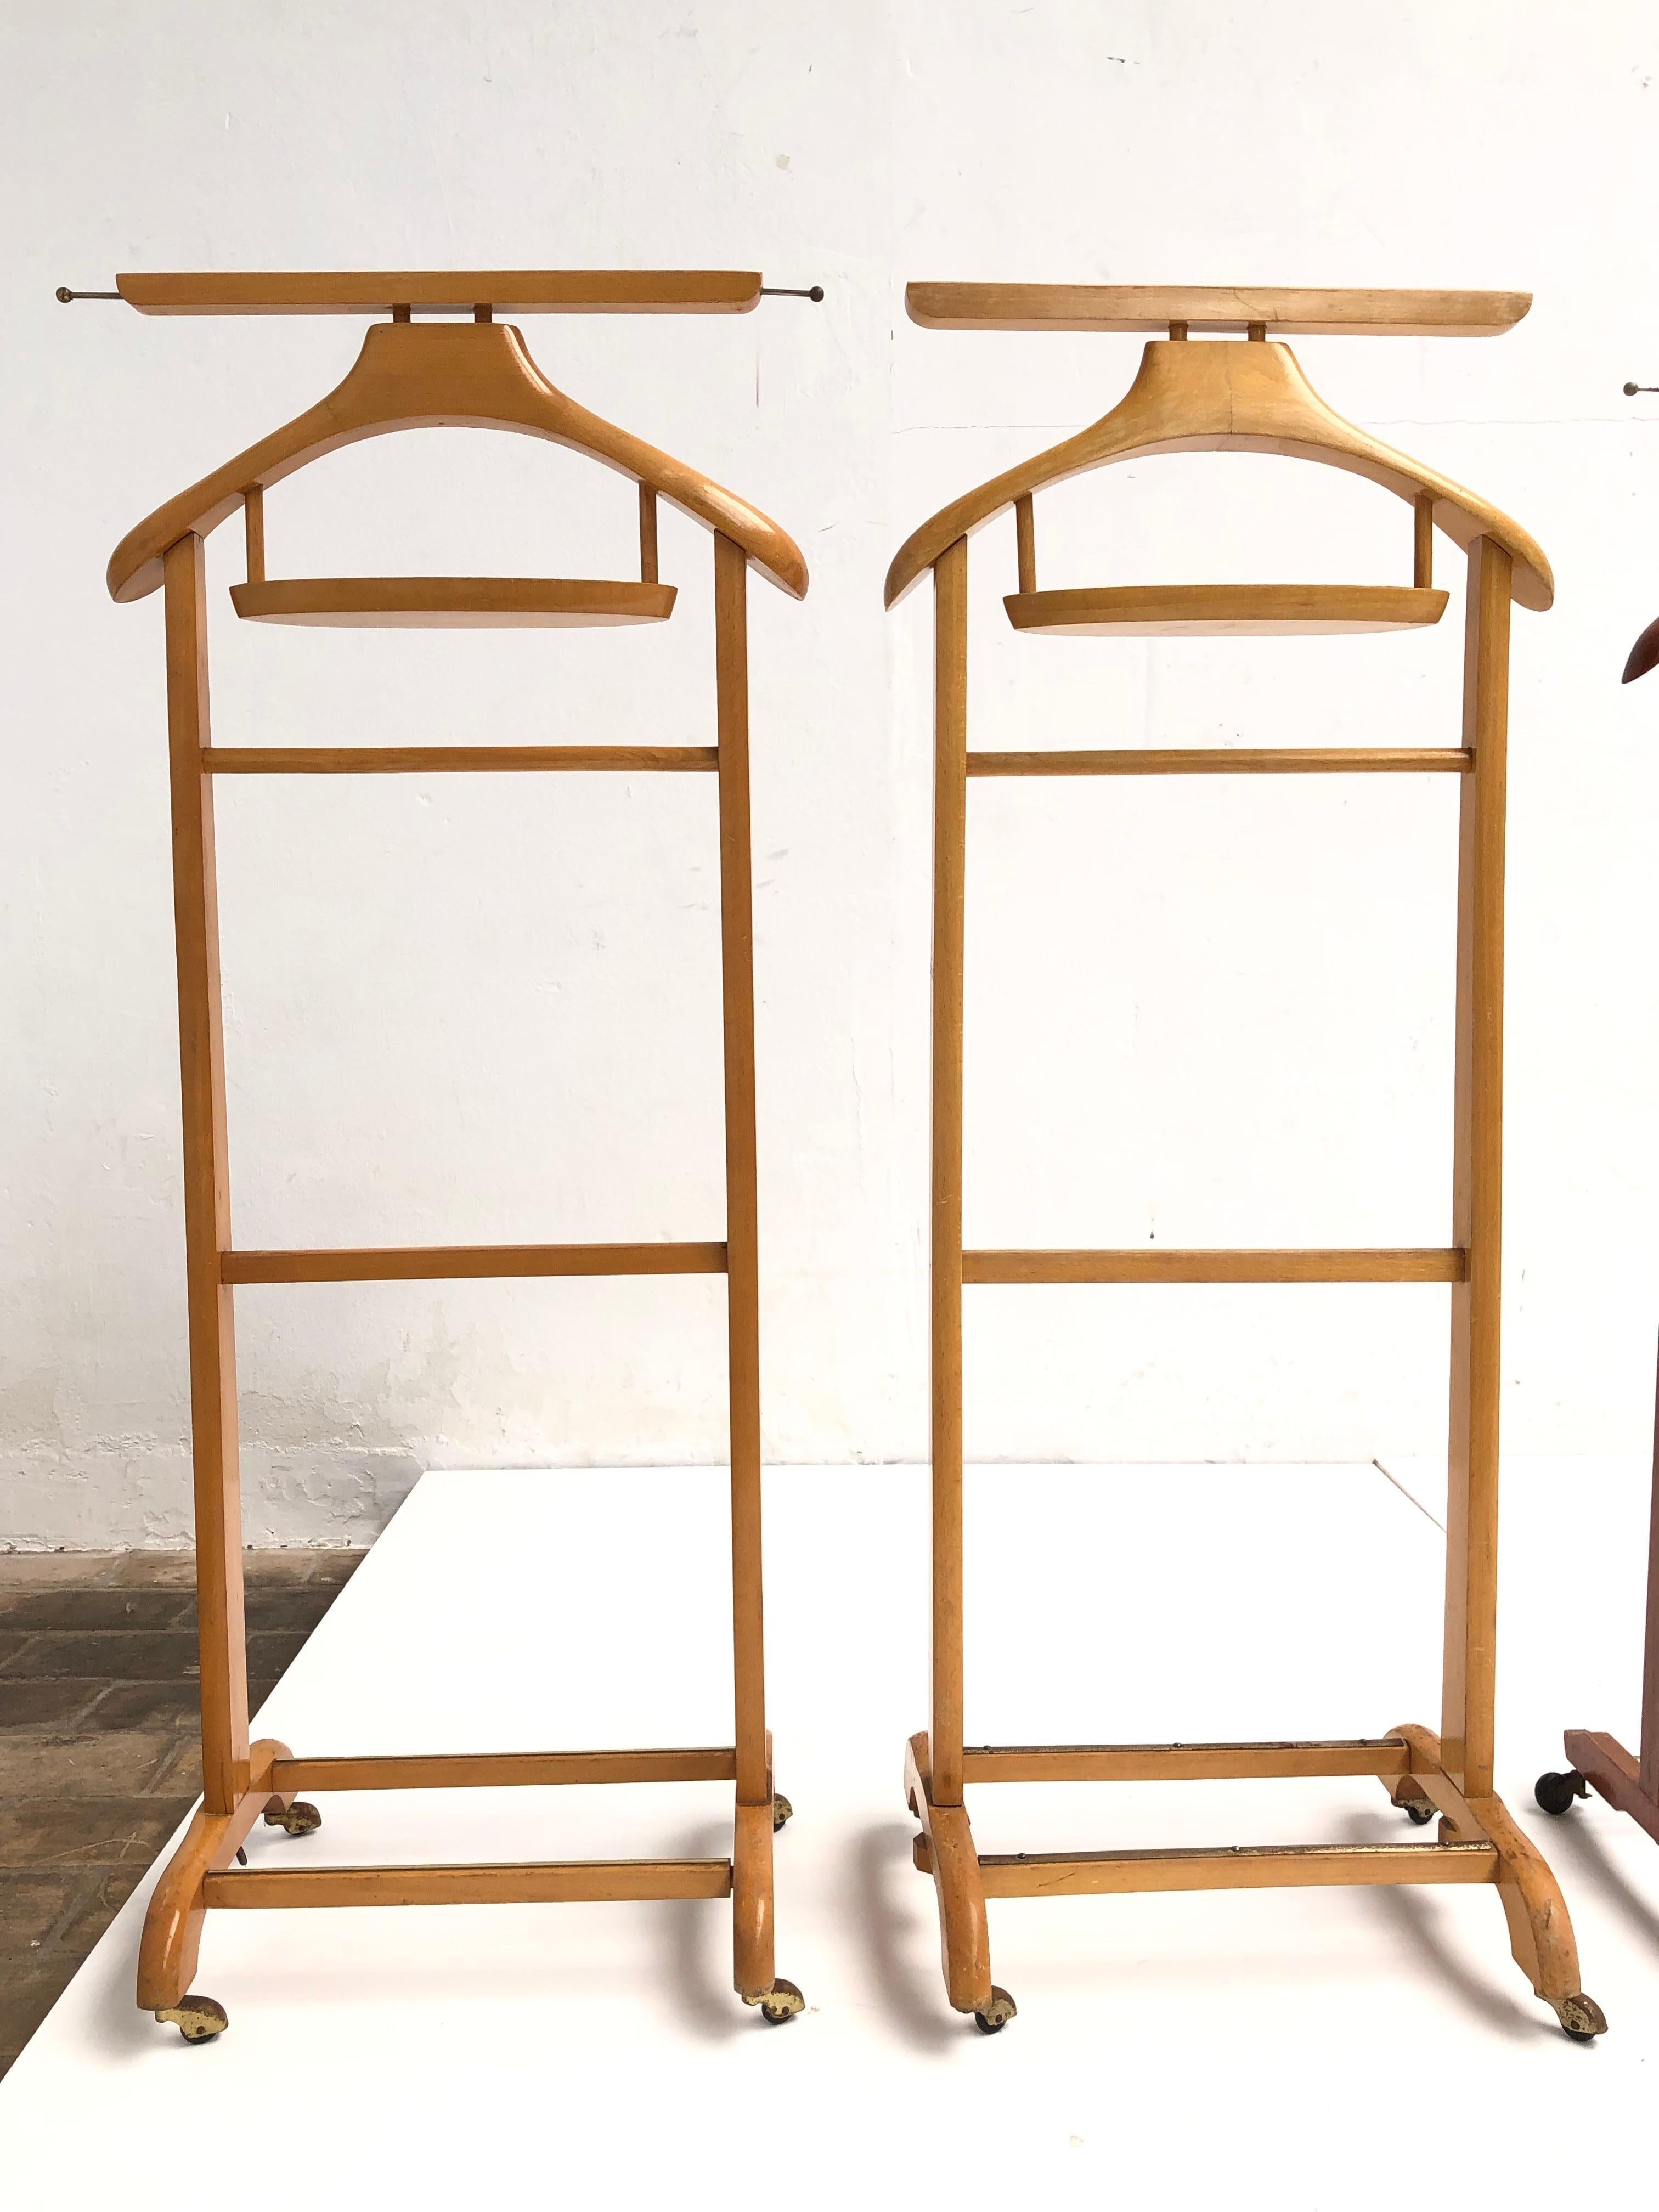 An eclectic collection of 10 dressboys / valet stands produced by Fratelli Reguitti in Italy during the 1950s-1970s

Presented as a collection this would be an ideal purchase for small hotels or B&B interiors

The dressboy's are in good vintage